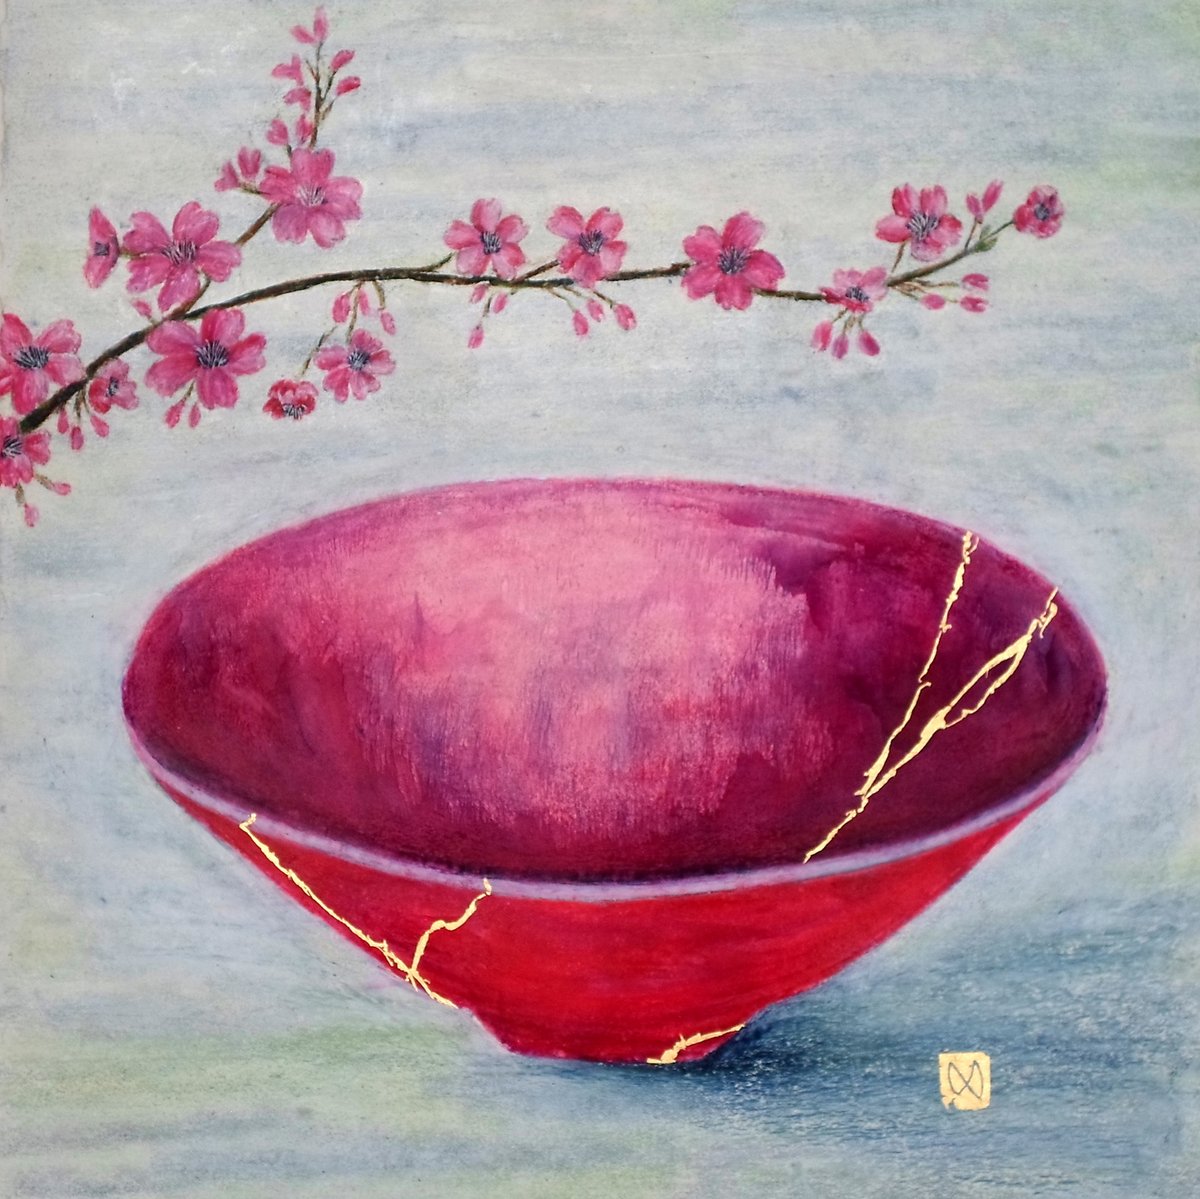 Painting of a pink bowl with cherry blossoms. Kintsugi repaired with gold